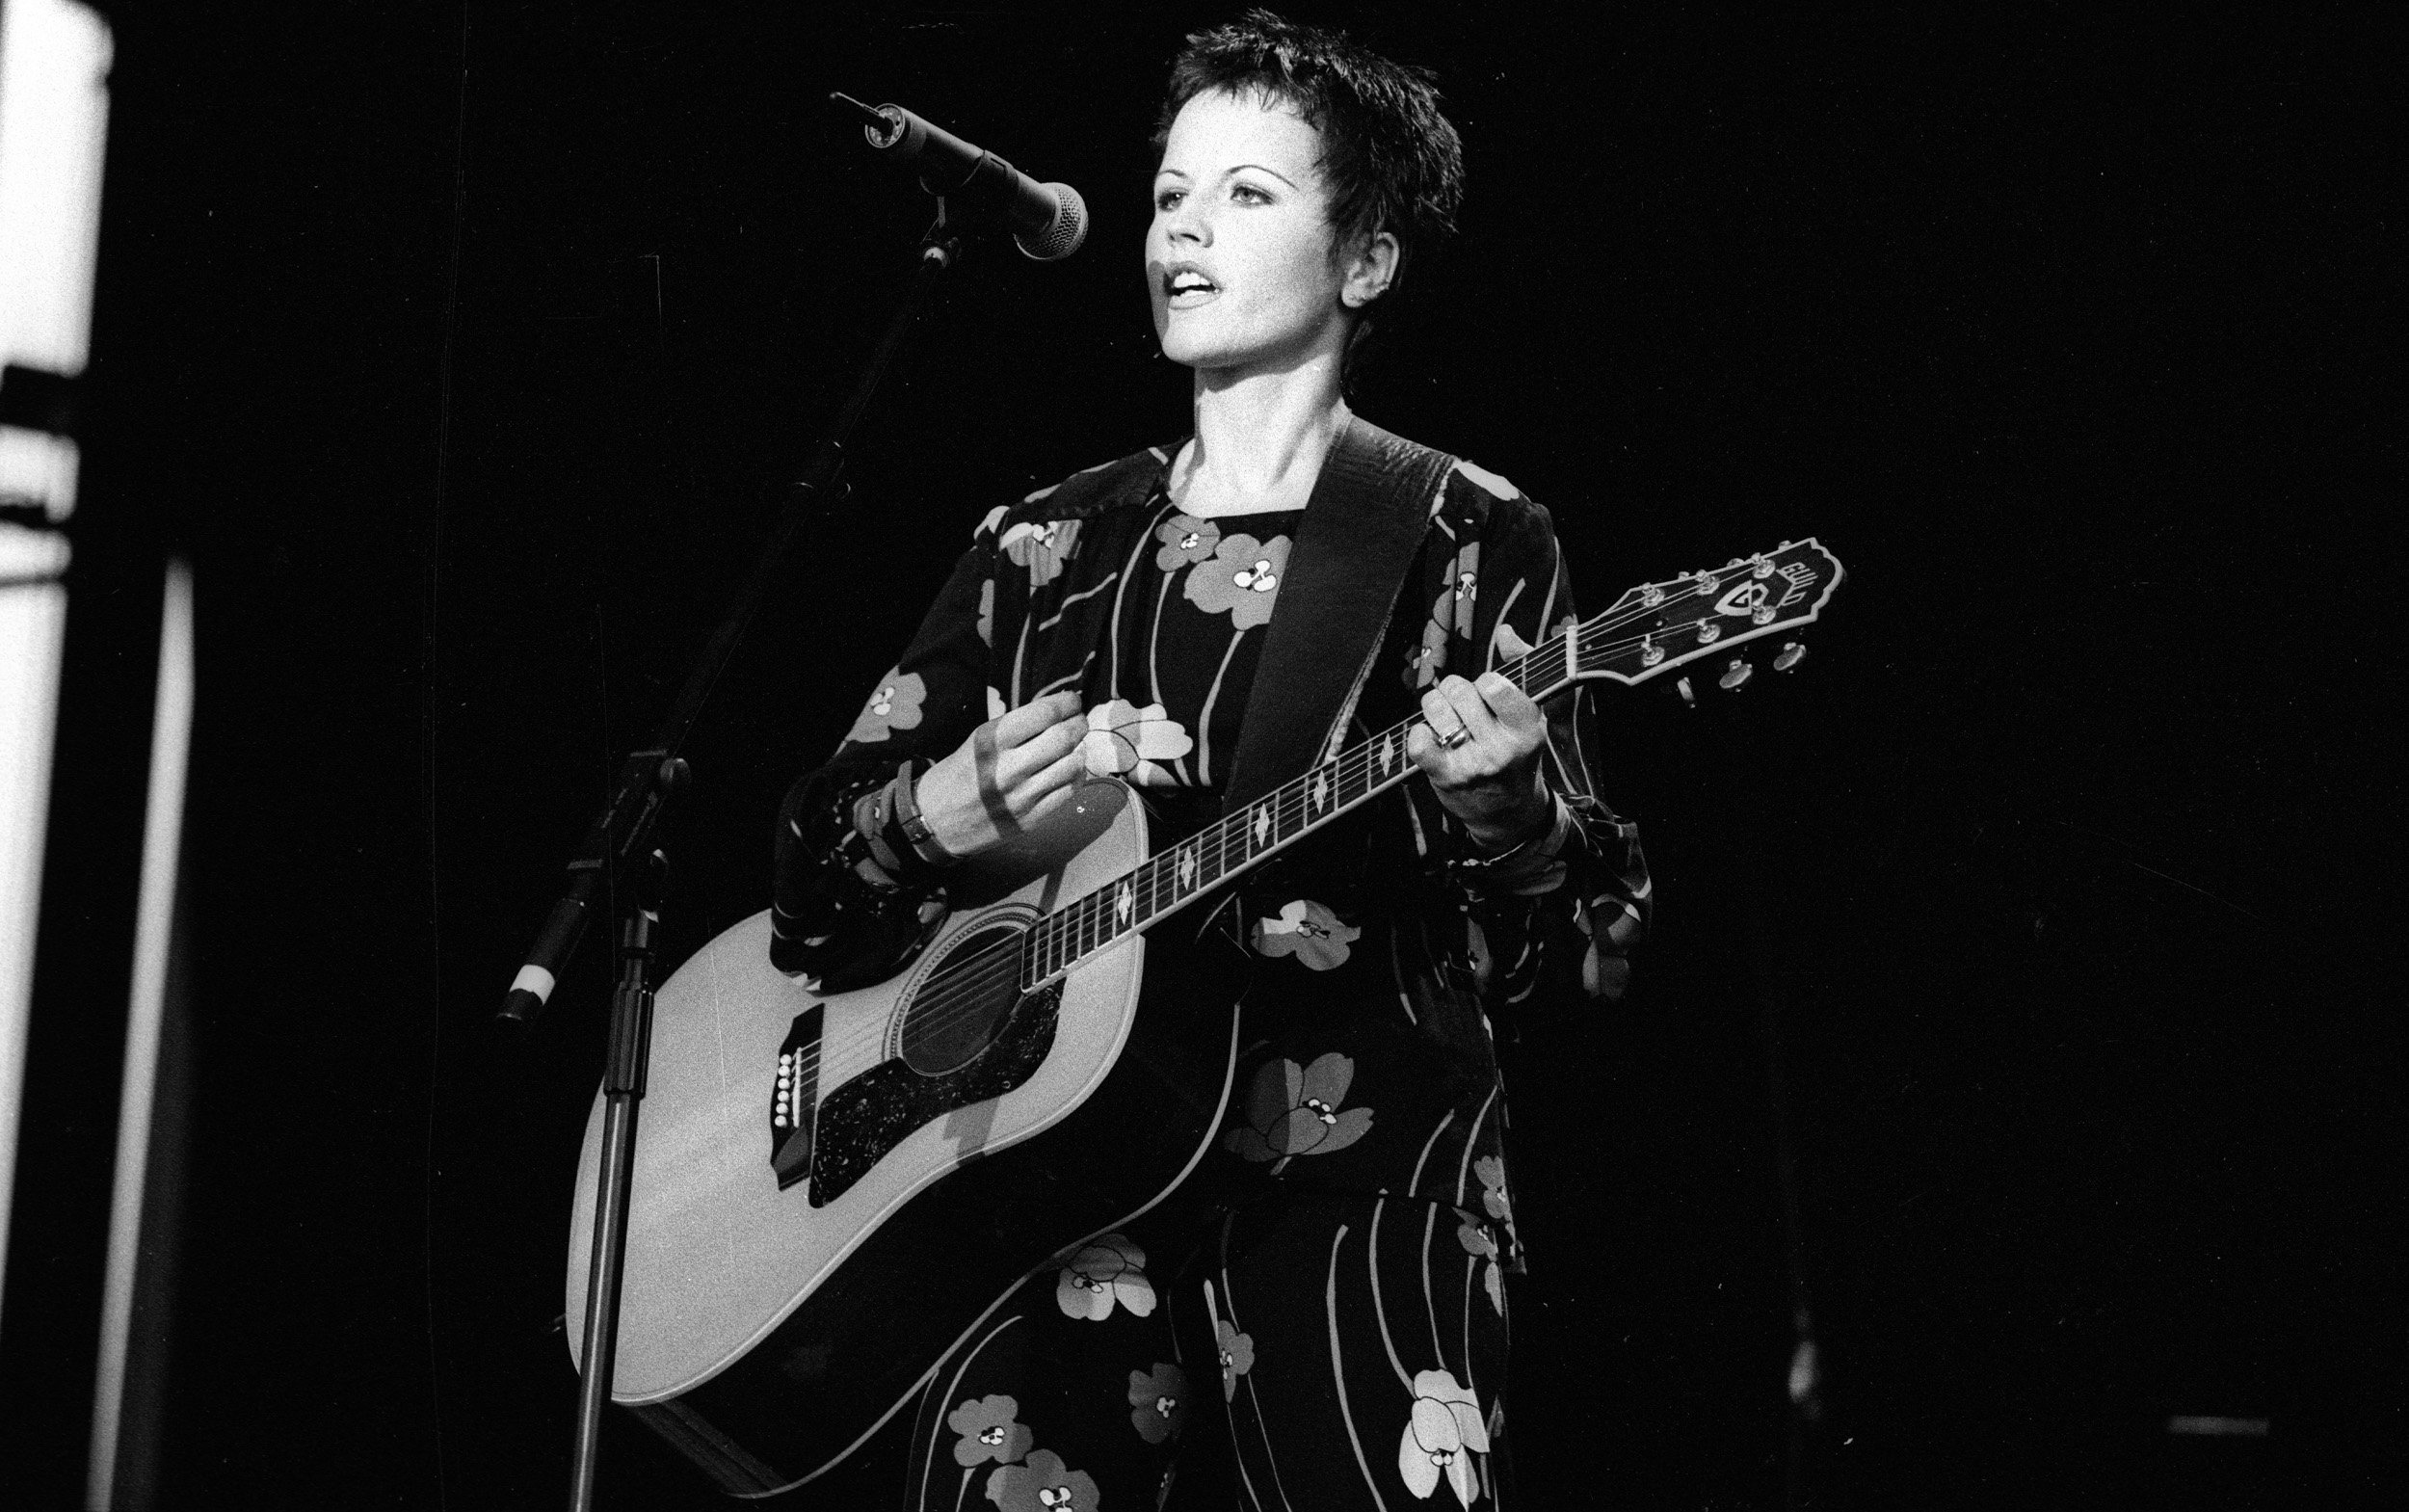 Dolores O'Riordan of The Cranberries with a guitar